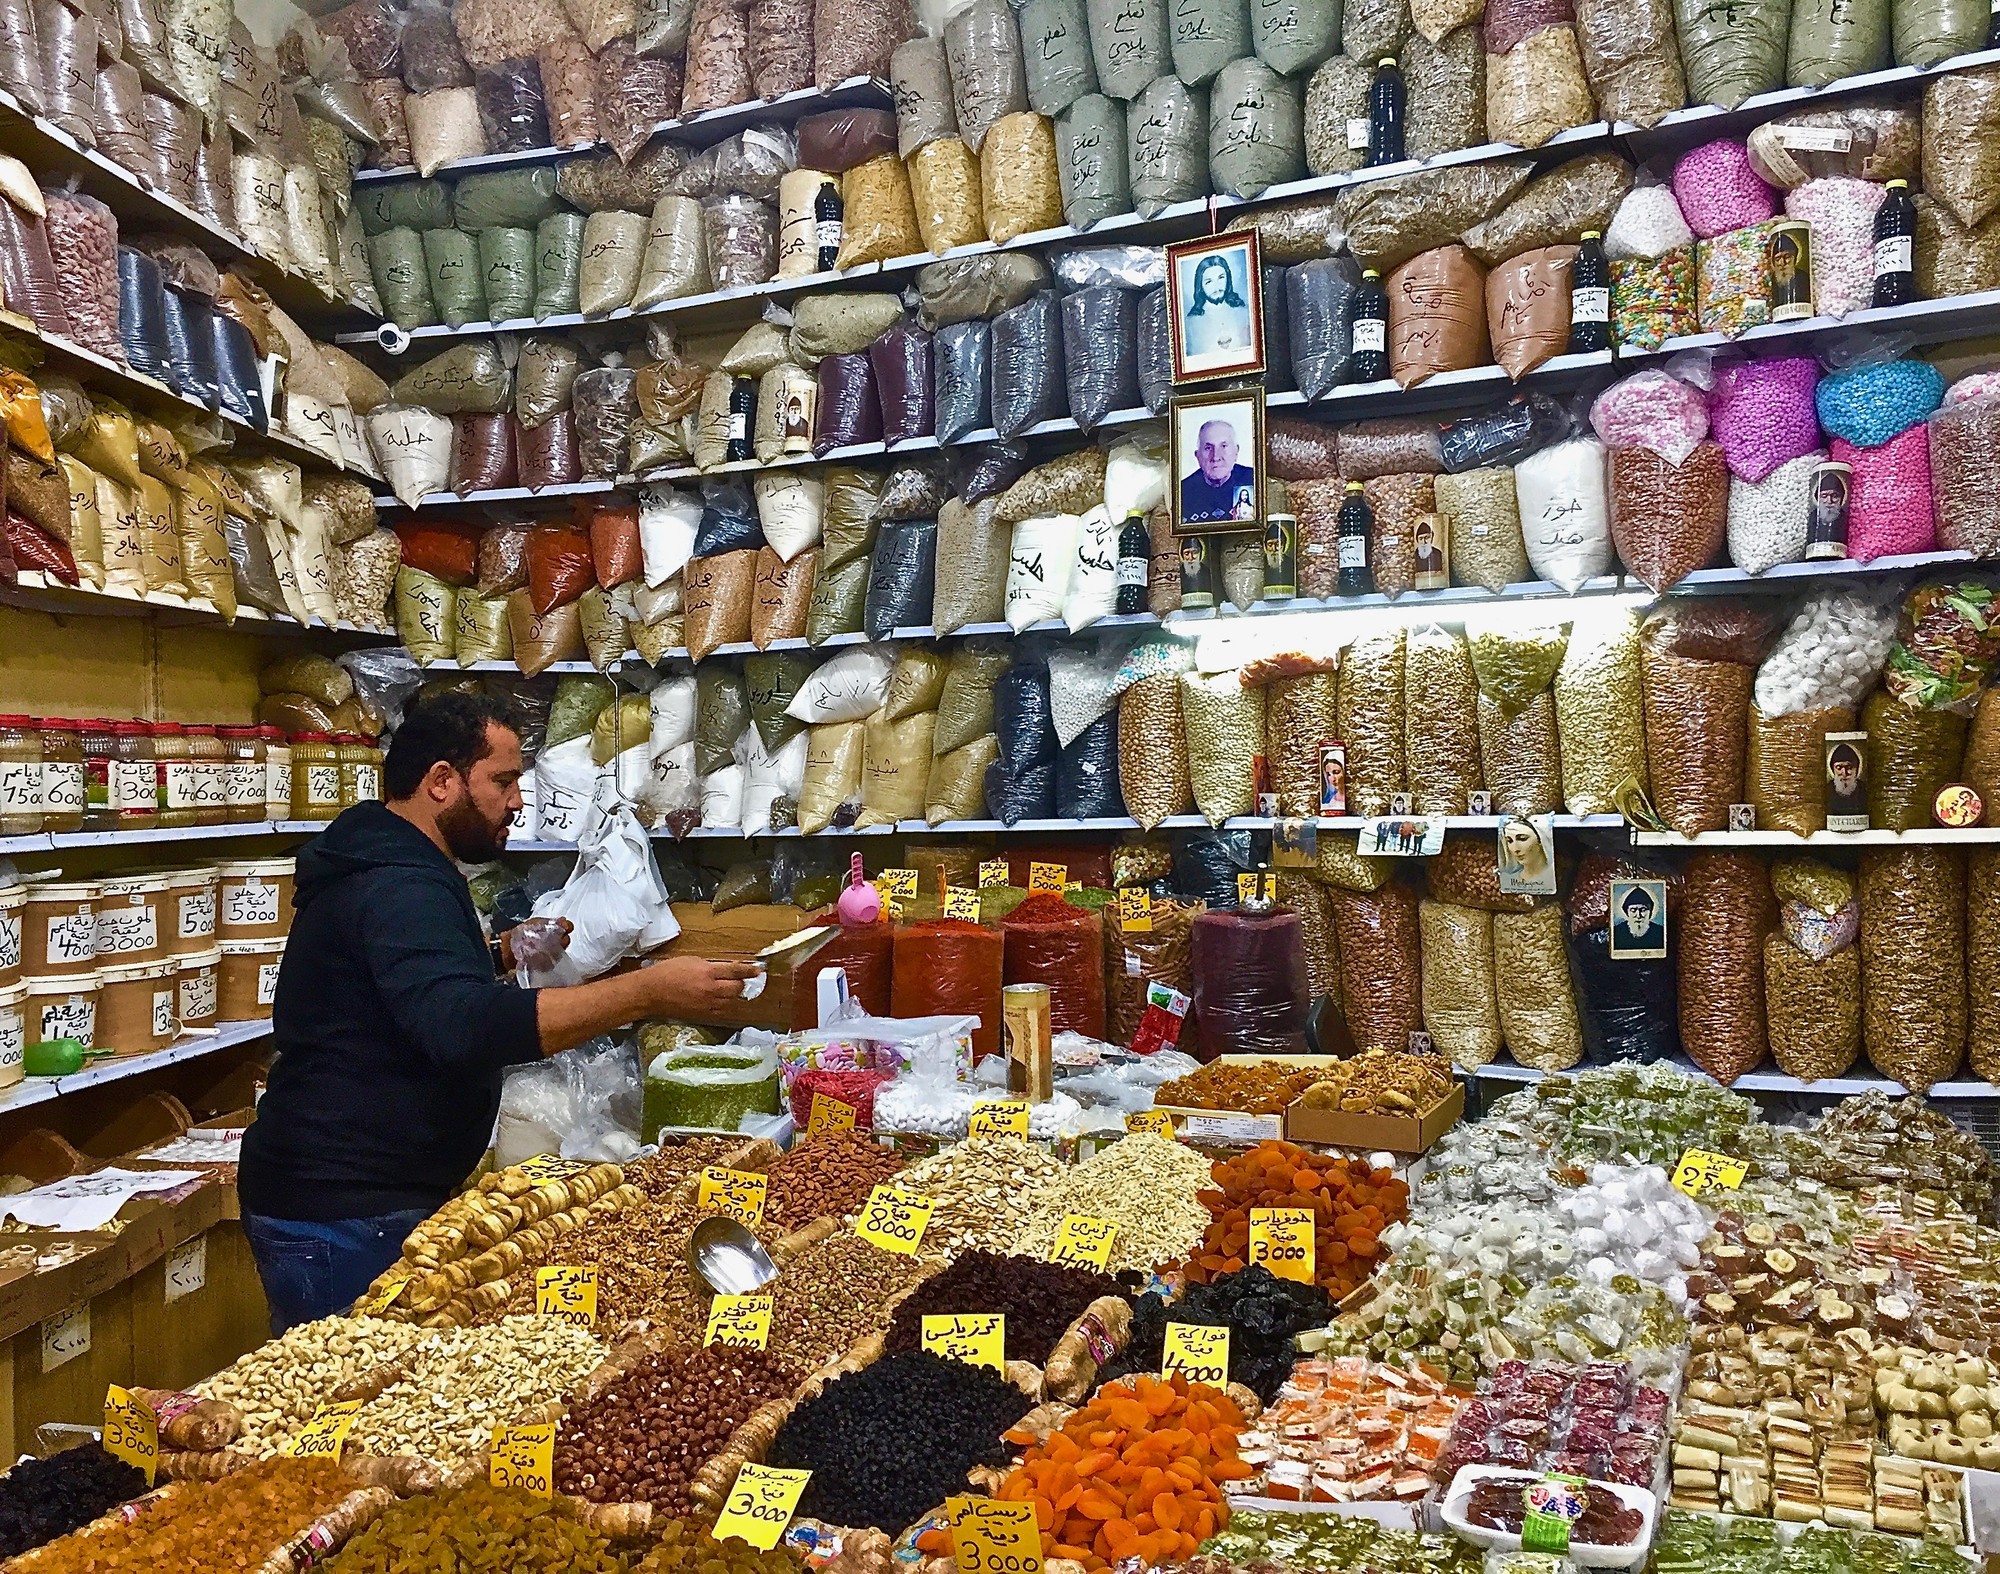 A spice market with a shop keeper